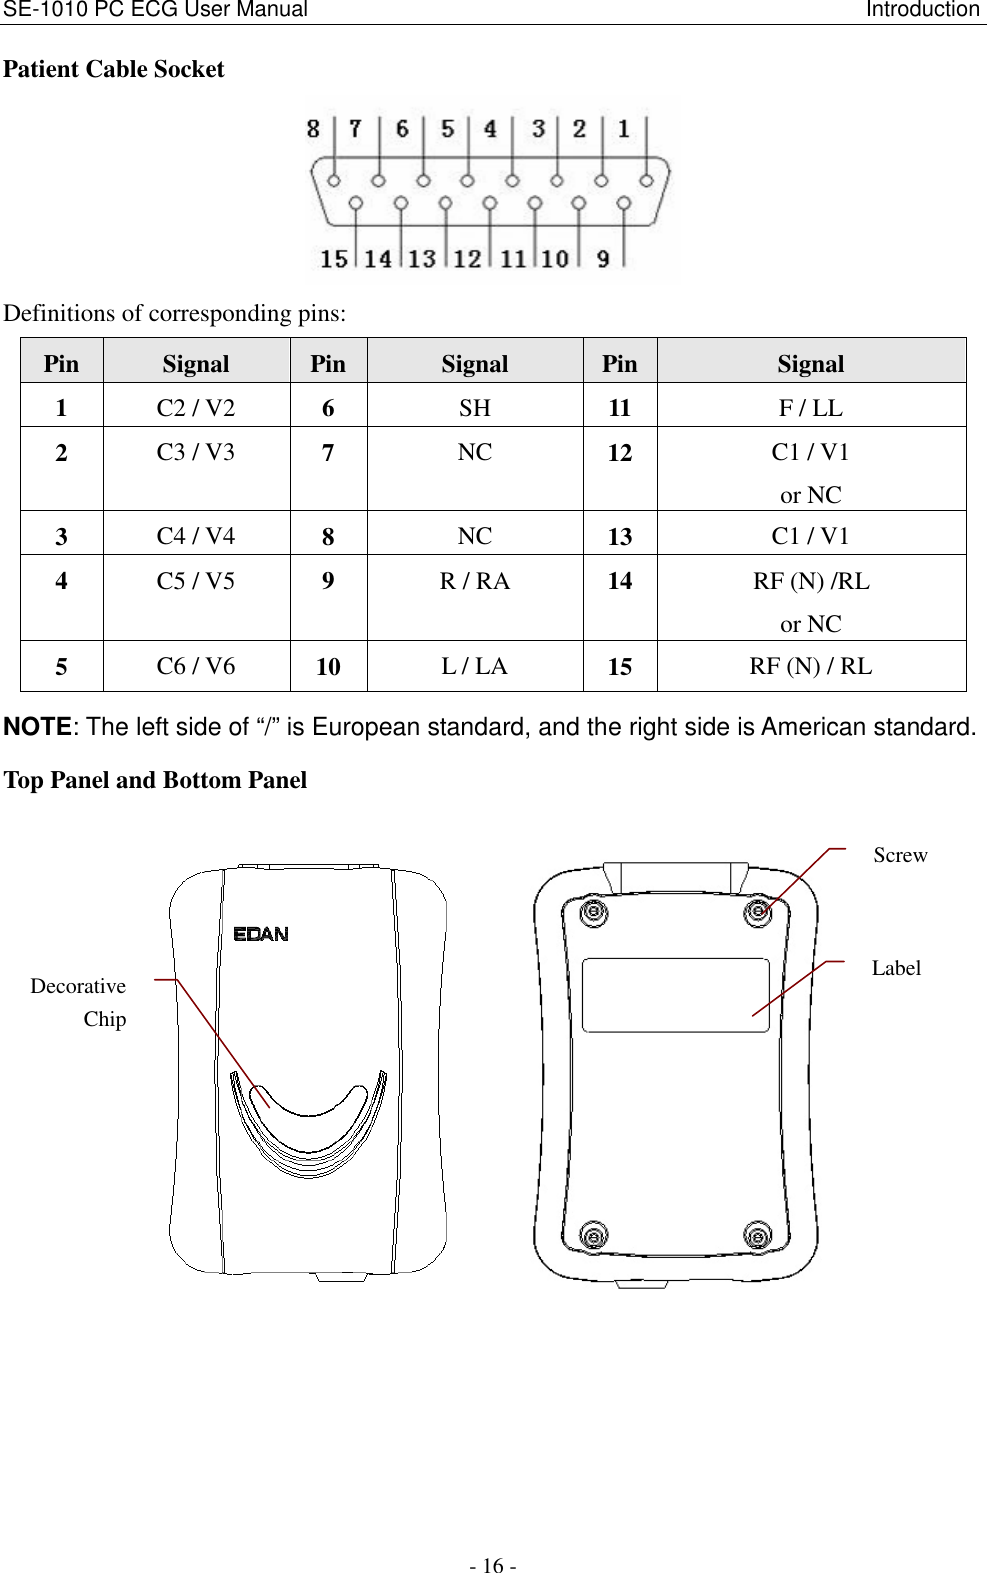 SE-1010 PC ECG User Manual                                                                                                      Introduction - 16 - Patient Cable Socket  Definitions of corresponding pins: Pin  Signal  Pin  Signal  Pin Signal 1  C2 / V2  6  SH  11  F / LL 2  C3 / V3  7  NC  12  C1 / V1 or NC 3  C4 / V4  8  NC  13  C1 / V1 4  C5 / V5  9  R / RA  14  RF (N) /RL   or NC 5  C6 / V6  10  L / LA  15  RF (N) / RL NOTE: The left side of “/” is European standard, and the right side is American standard. Top Panel and Bottom Panel               Decorative Chip Label Screw 